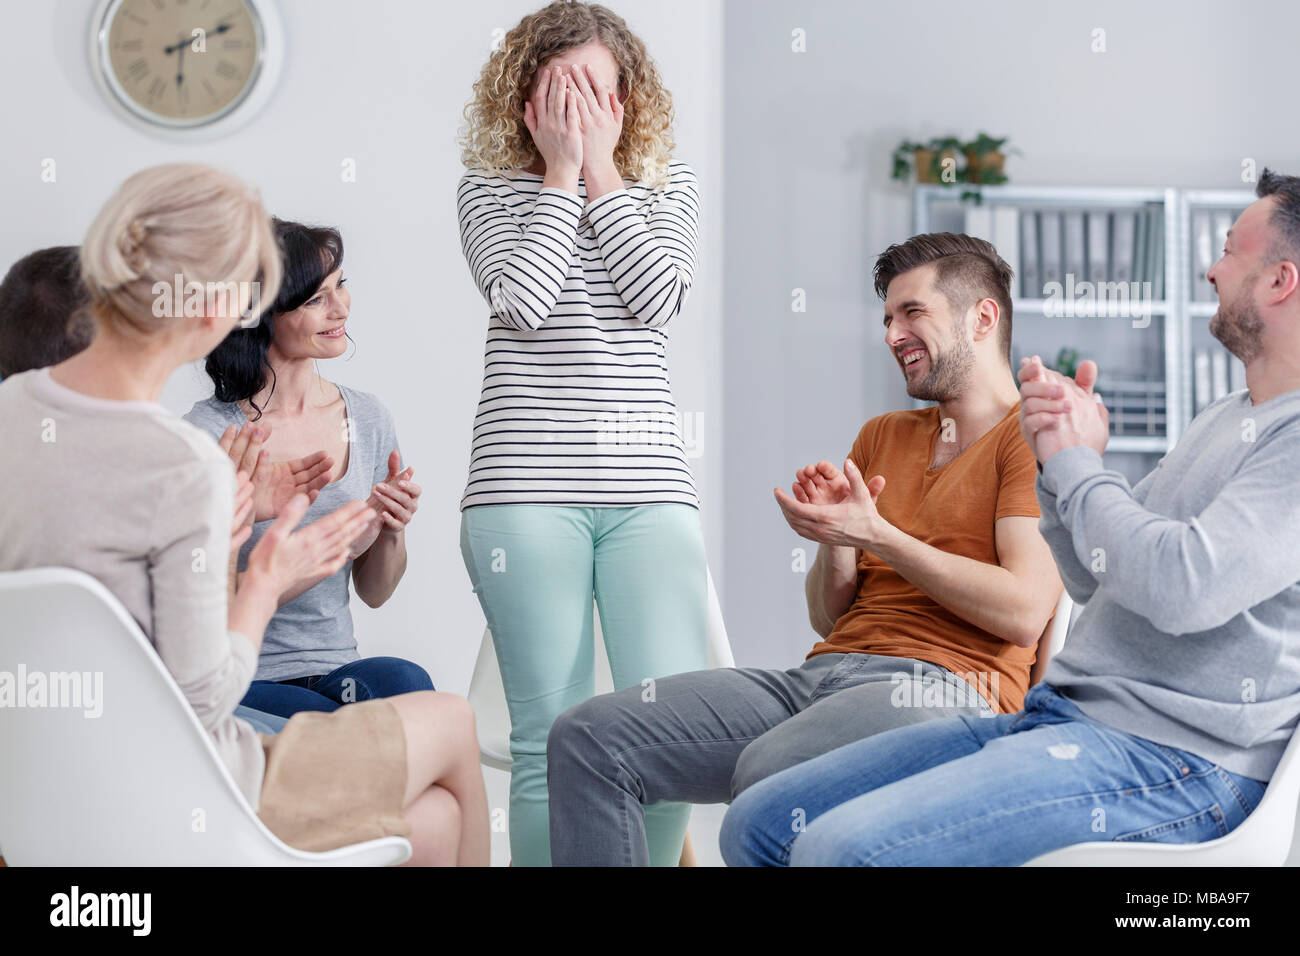 Girl hiding her face in her hands and happy people laughing and clapping in group psychotherapy Stock Photo